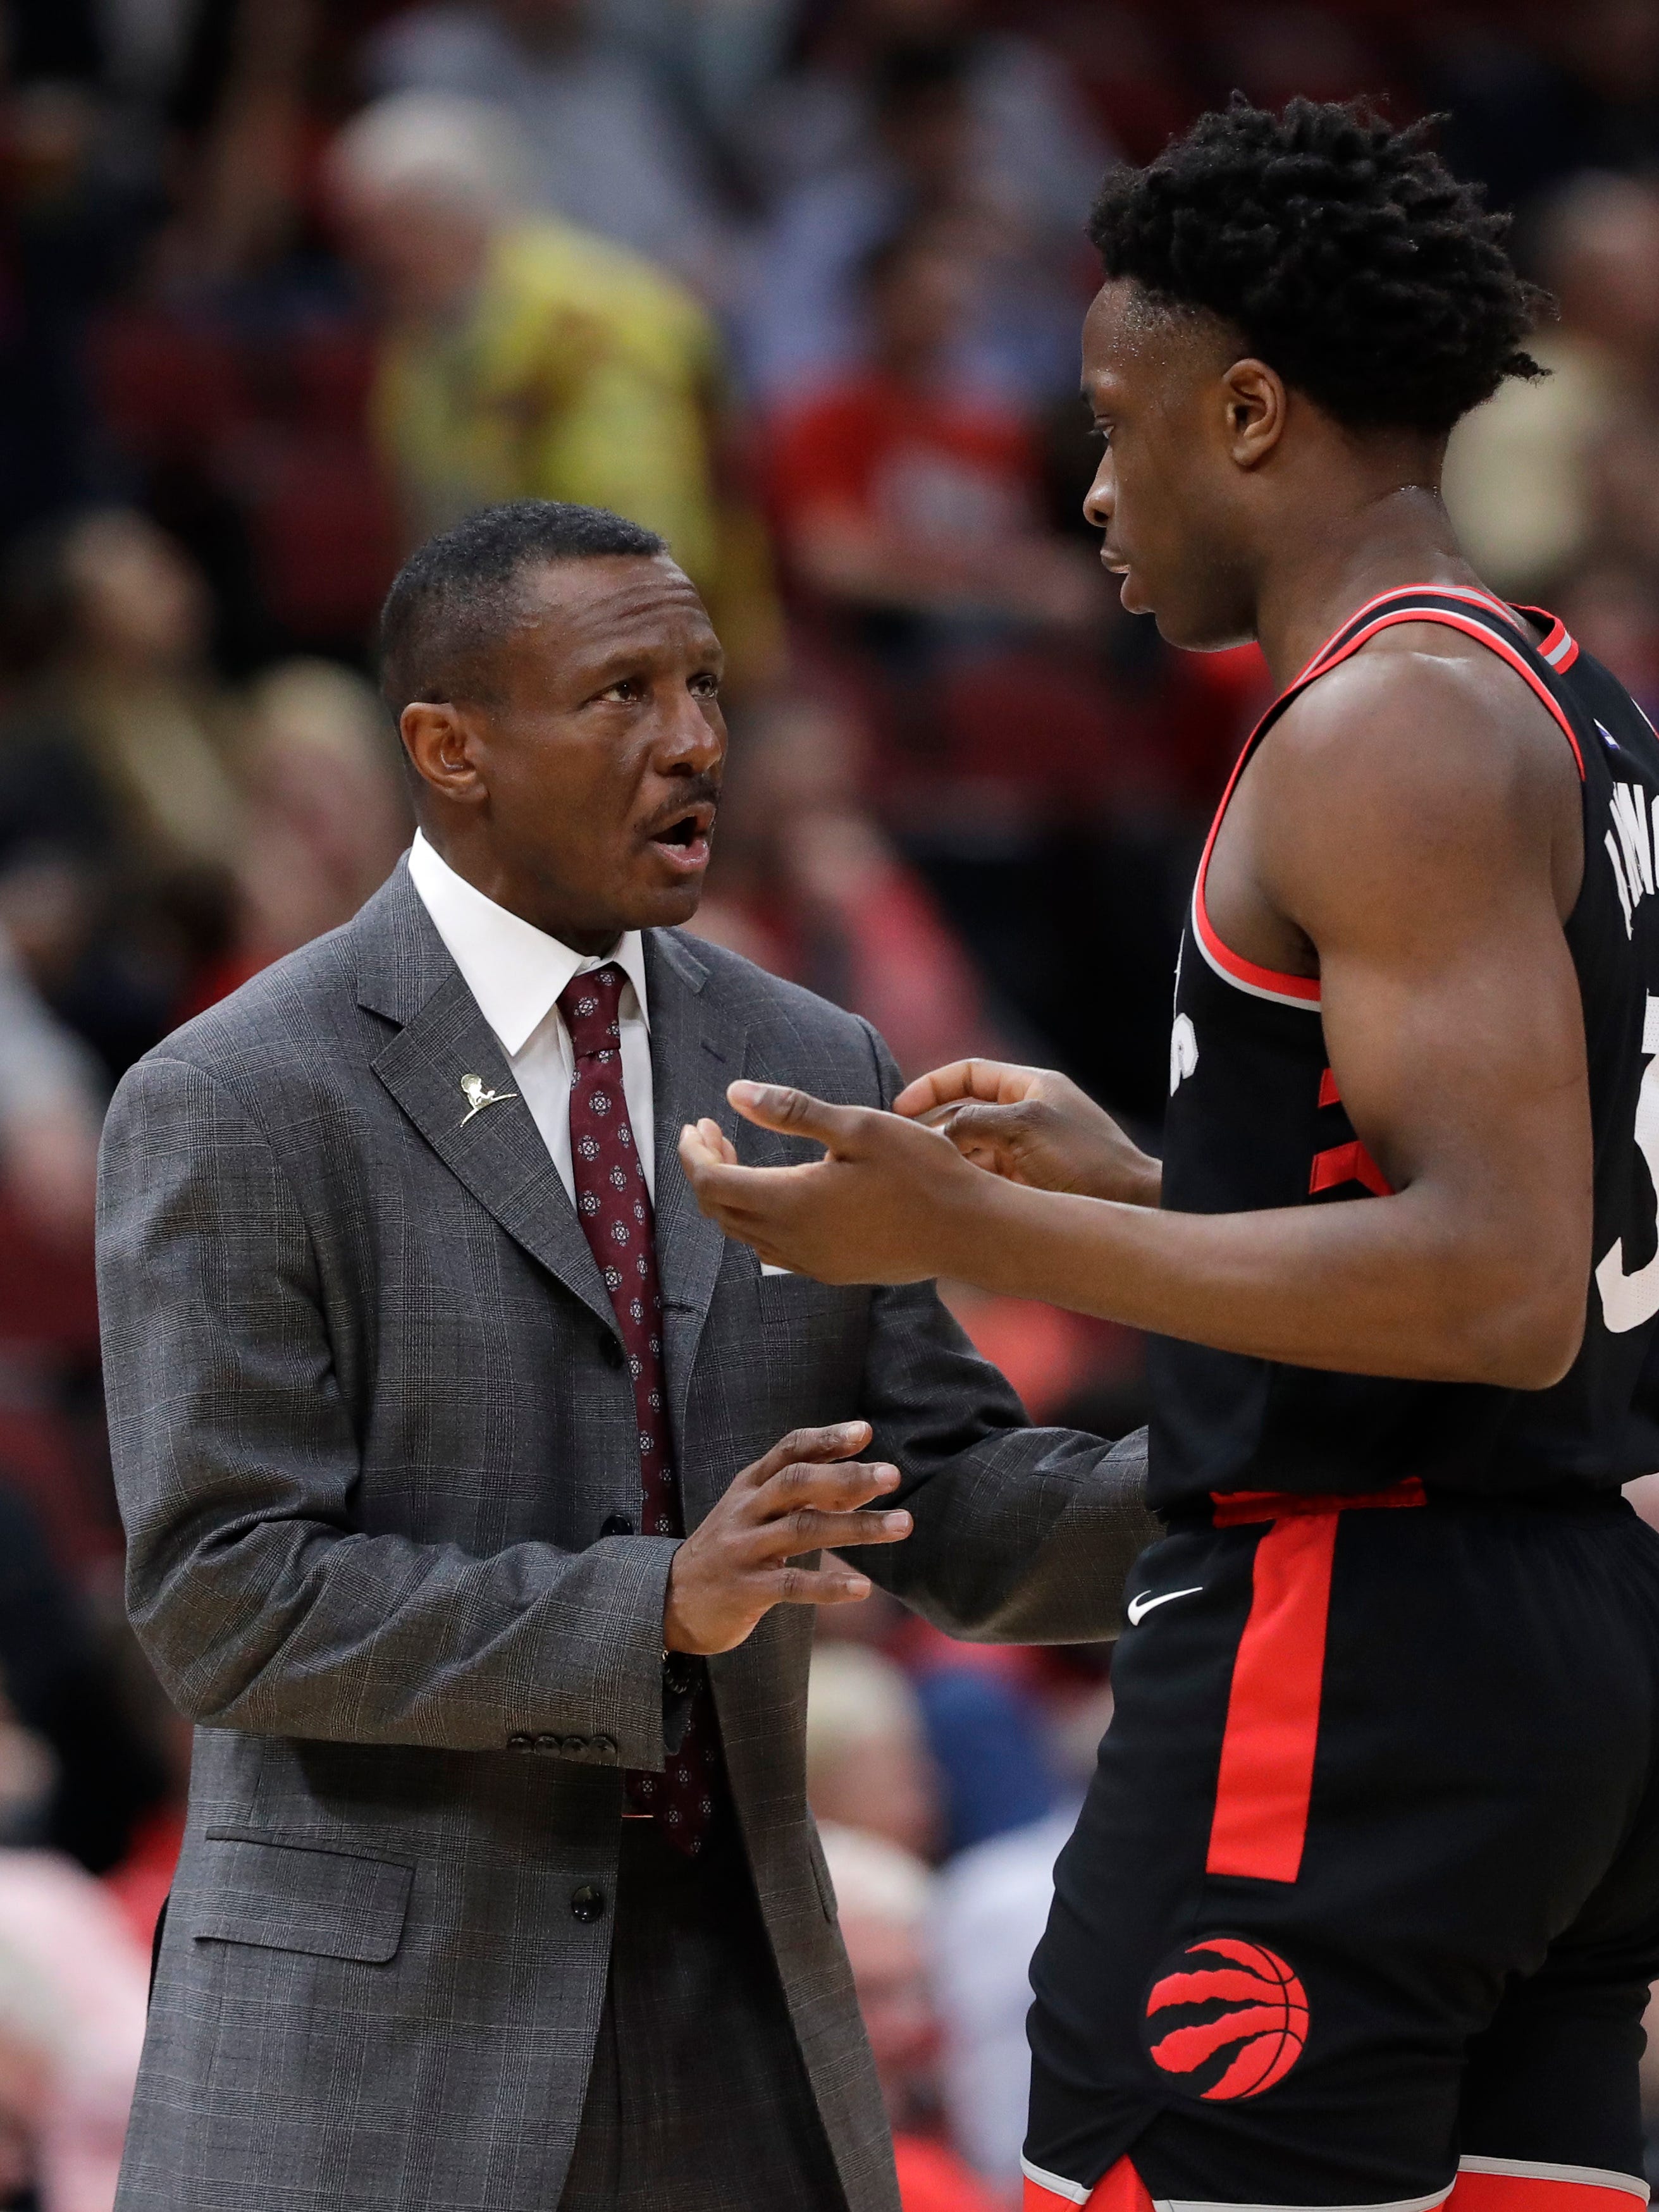 Toronto Raptors head coach Dwane Casey, left, talks with forward OG Anunoby during the first half of an NBA basketball game against the Chicago Bulls, Wednesday, Feb. 14, 2018, in Chicago.